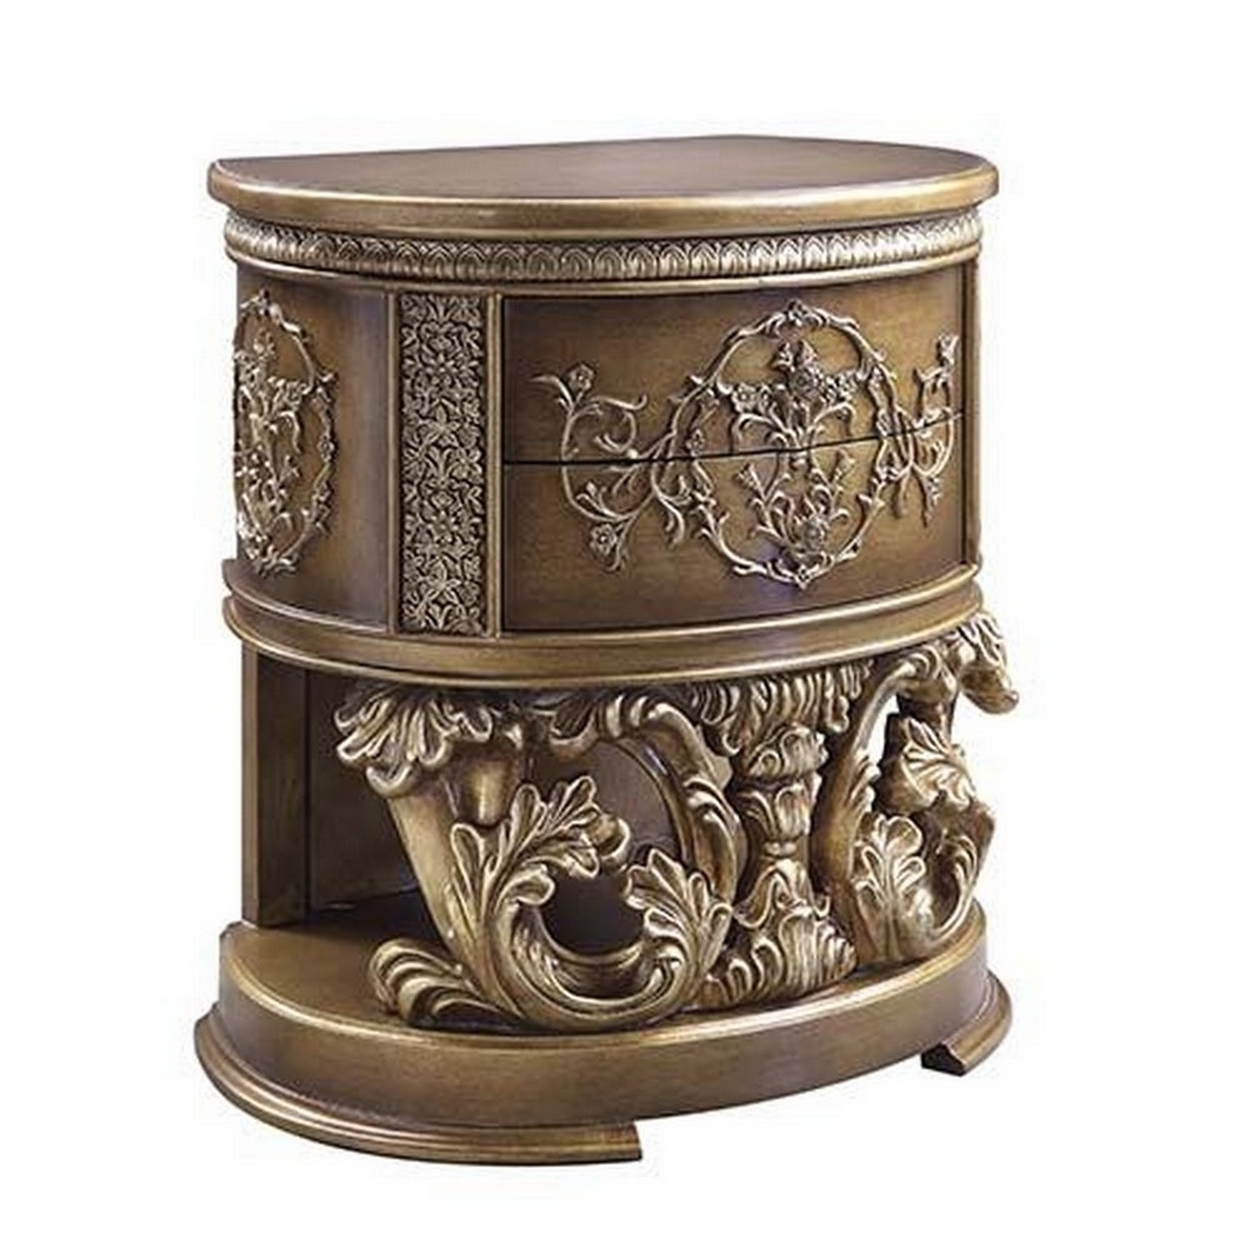 Nightstand With Scrolled Carvings And Half Moon Shape, Antique Gold- Saltoro Sherpi